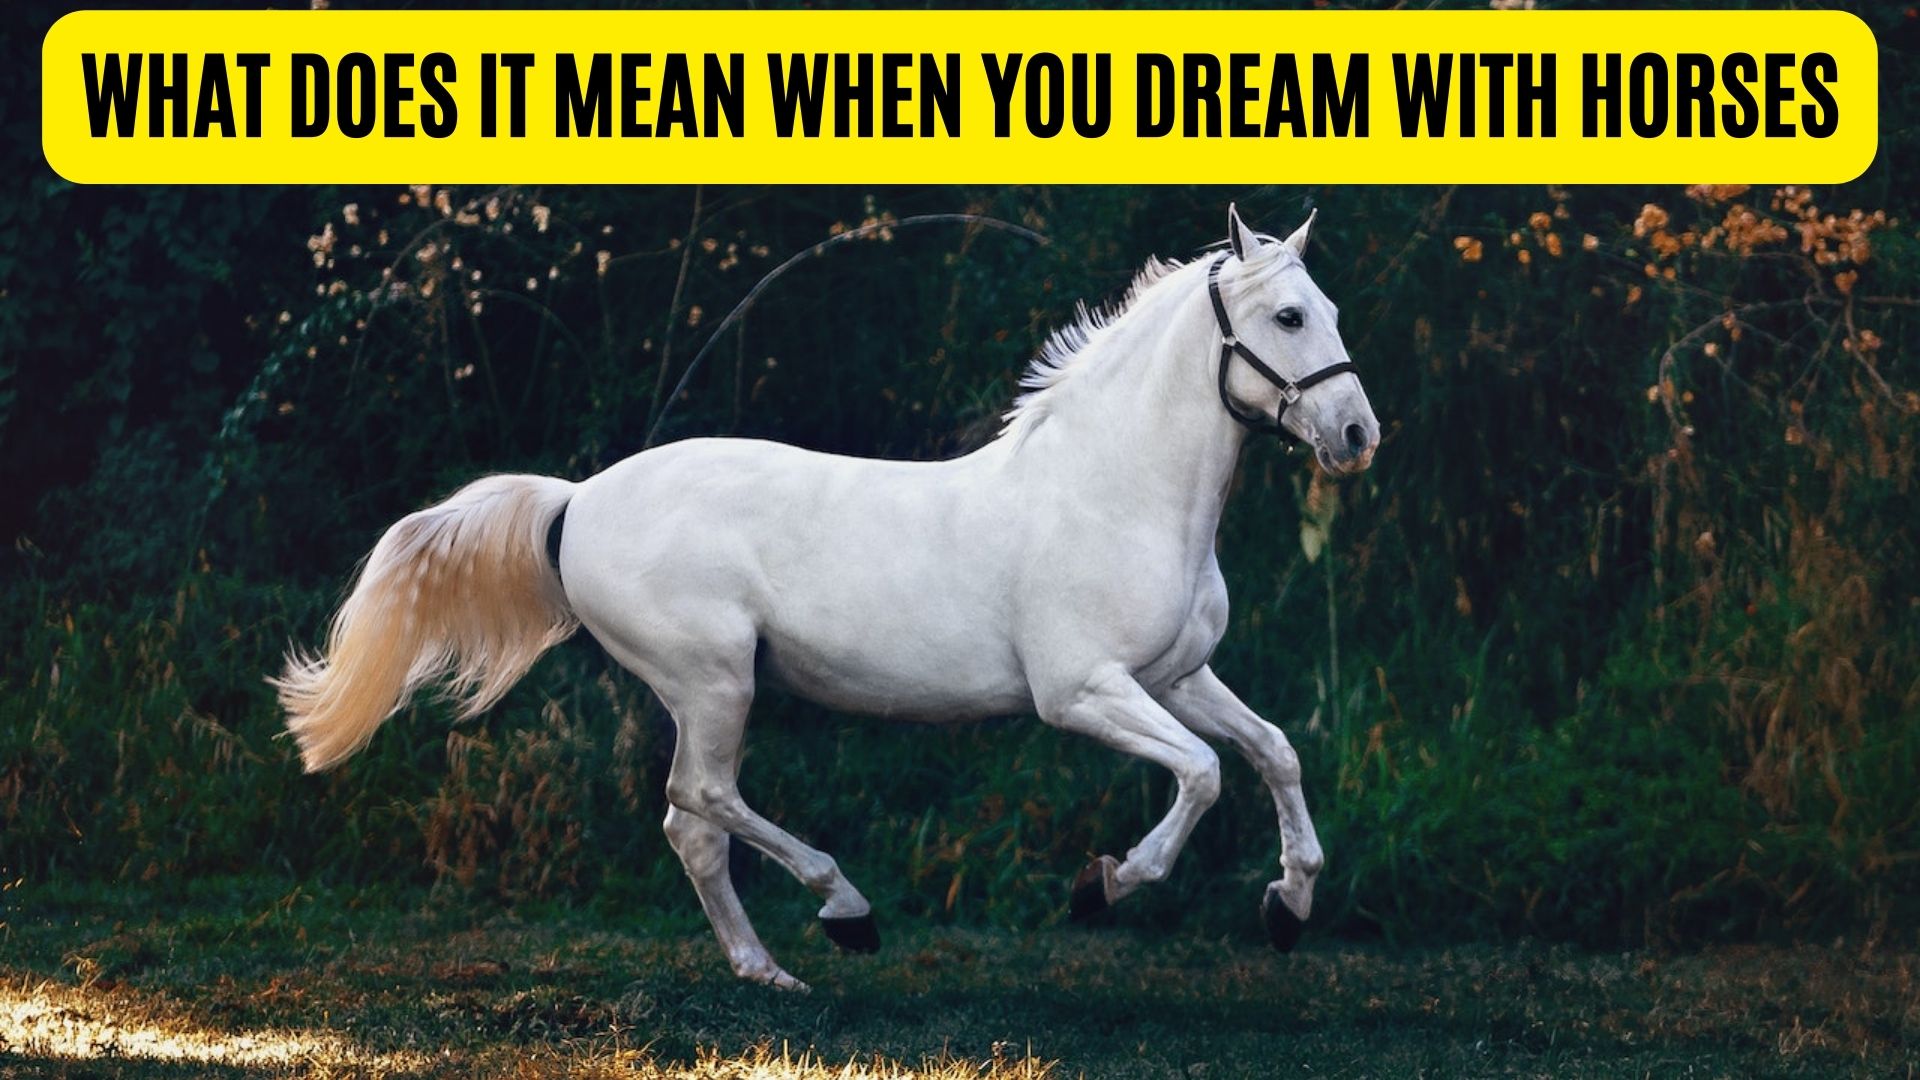 What Does It Mean When You Dream With Horses?